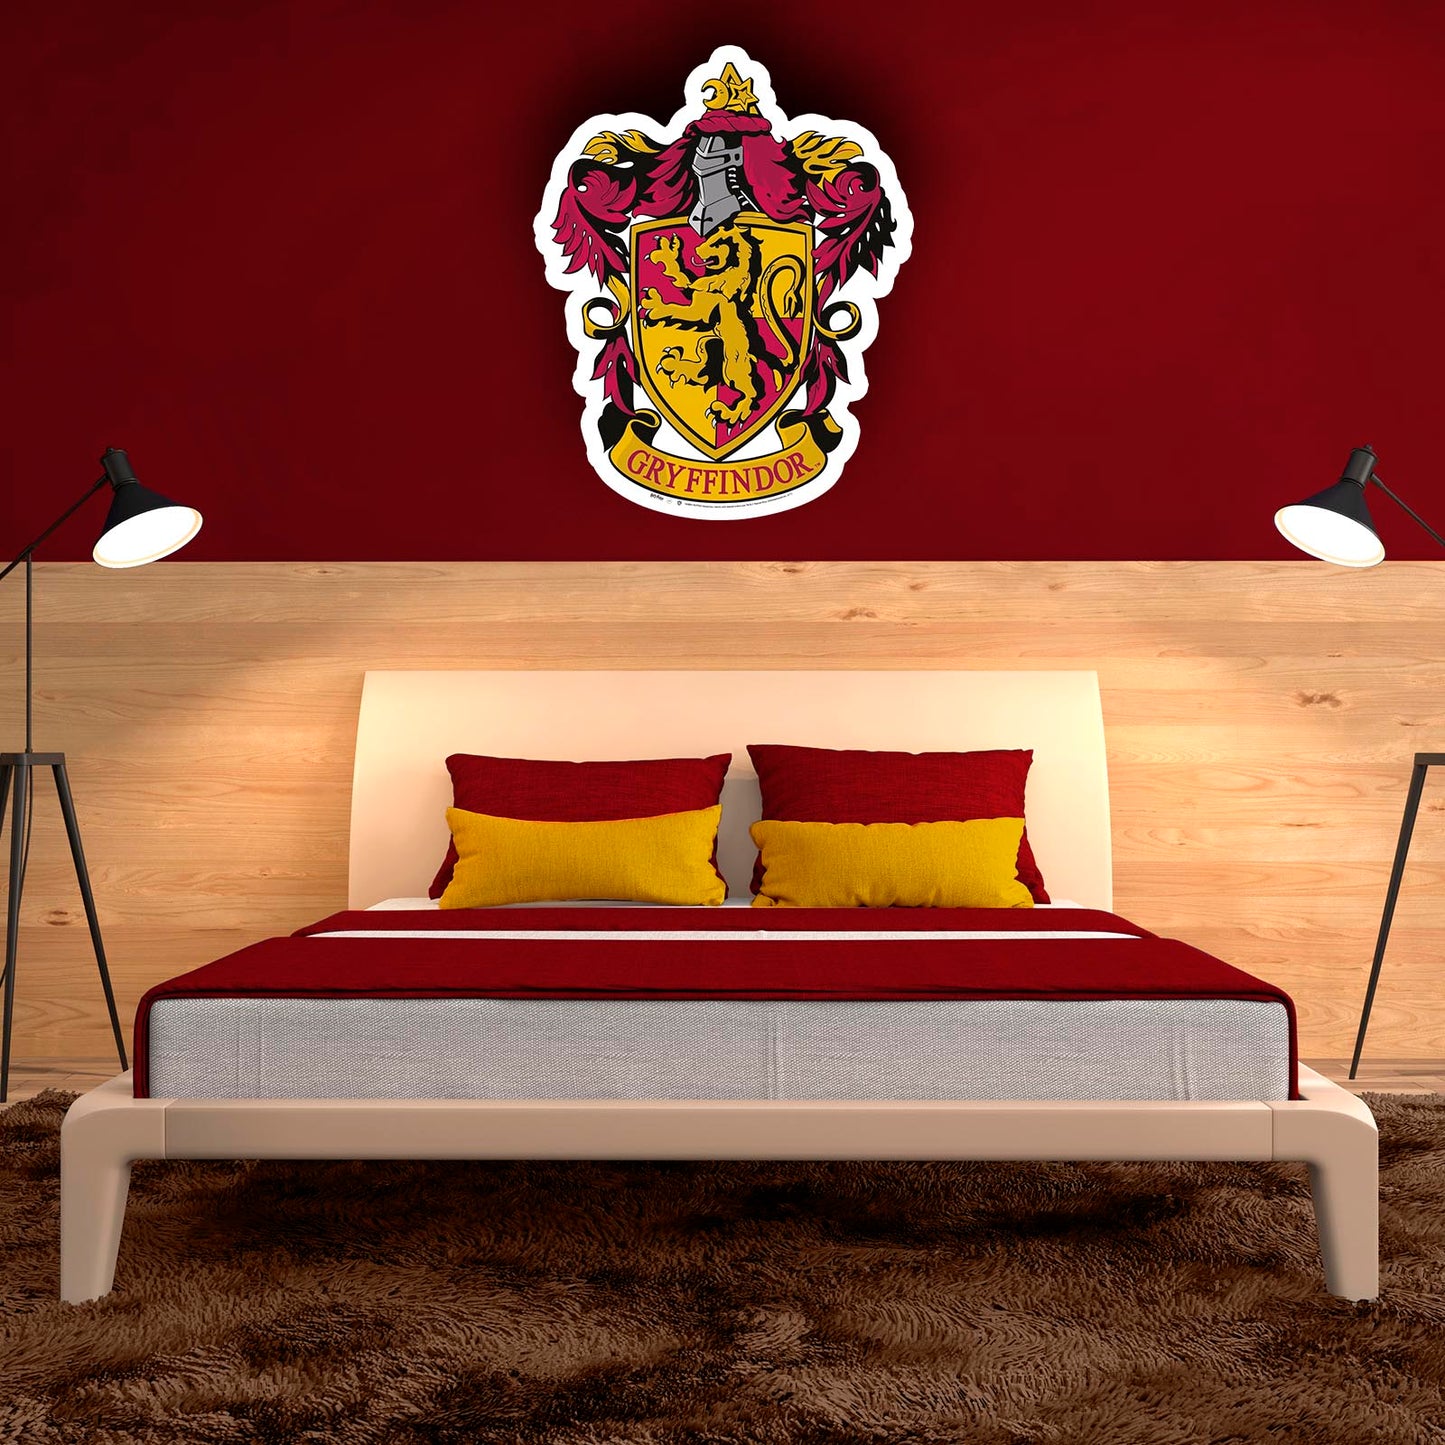 WA043 Gryffindor Emblem Wall Cut Out HARRY POTTER WIZARDING WORLD Height 61cm